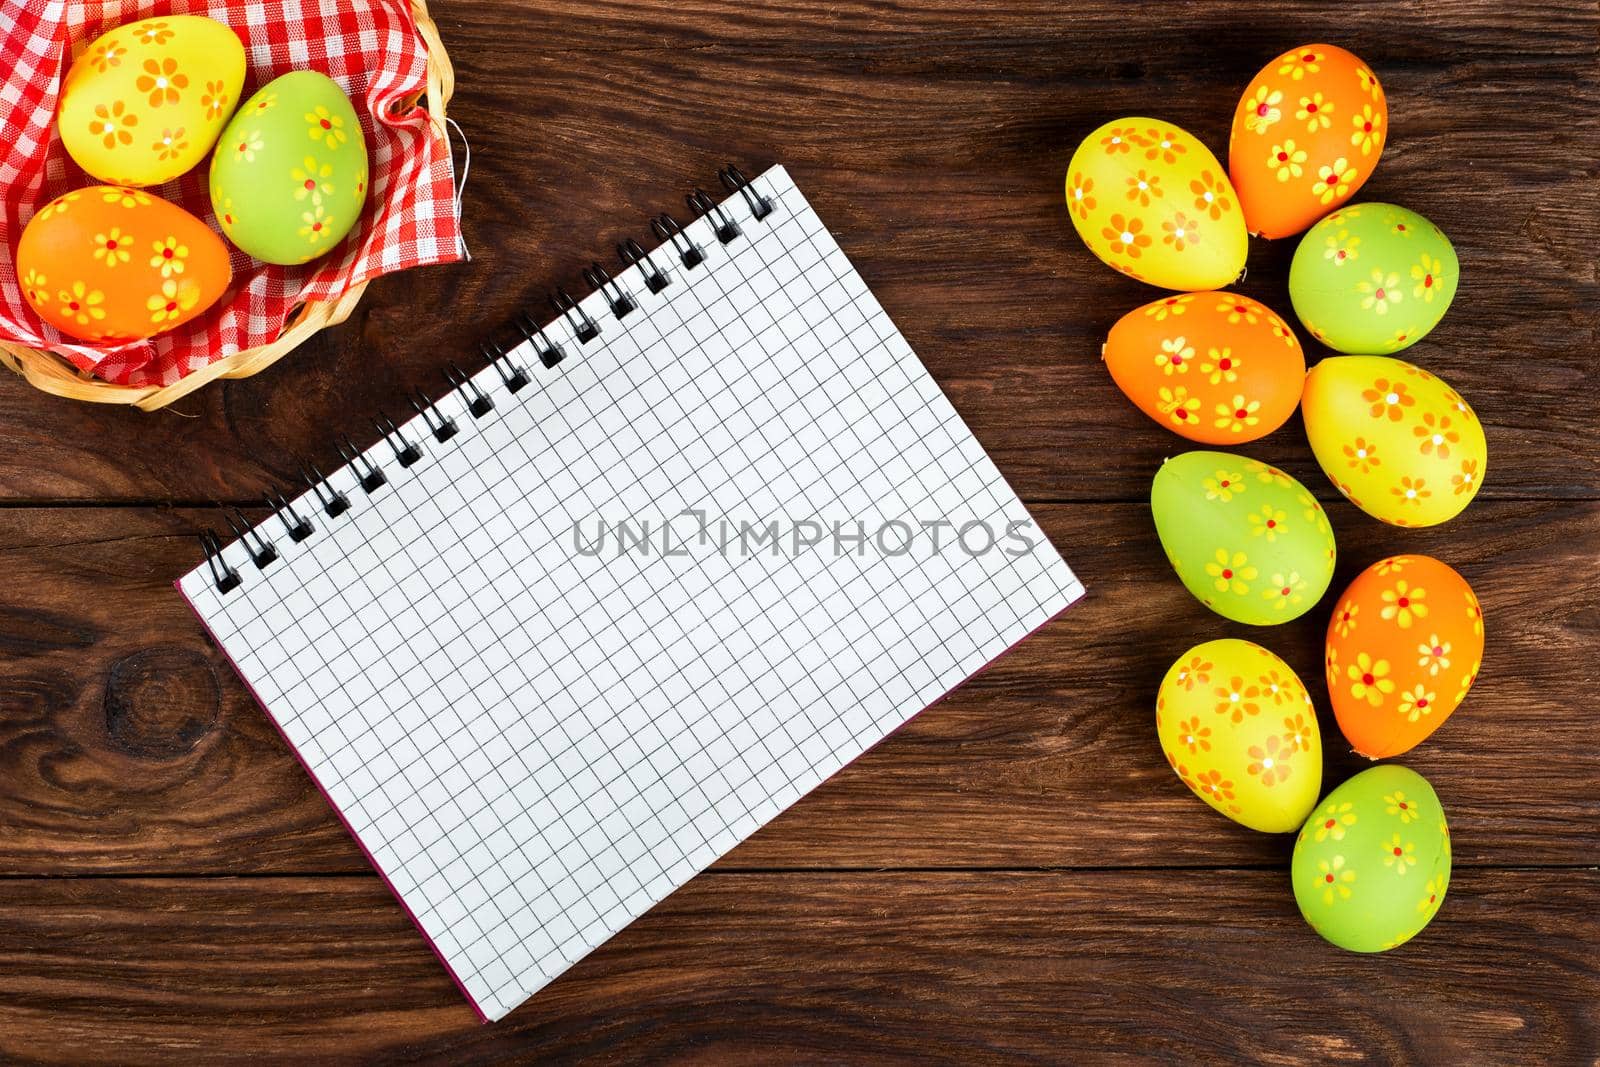 Blank notebook on a table with eggs for Easter greetings